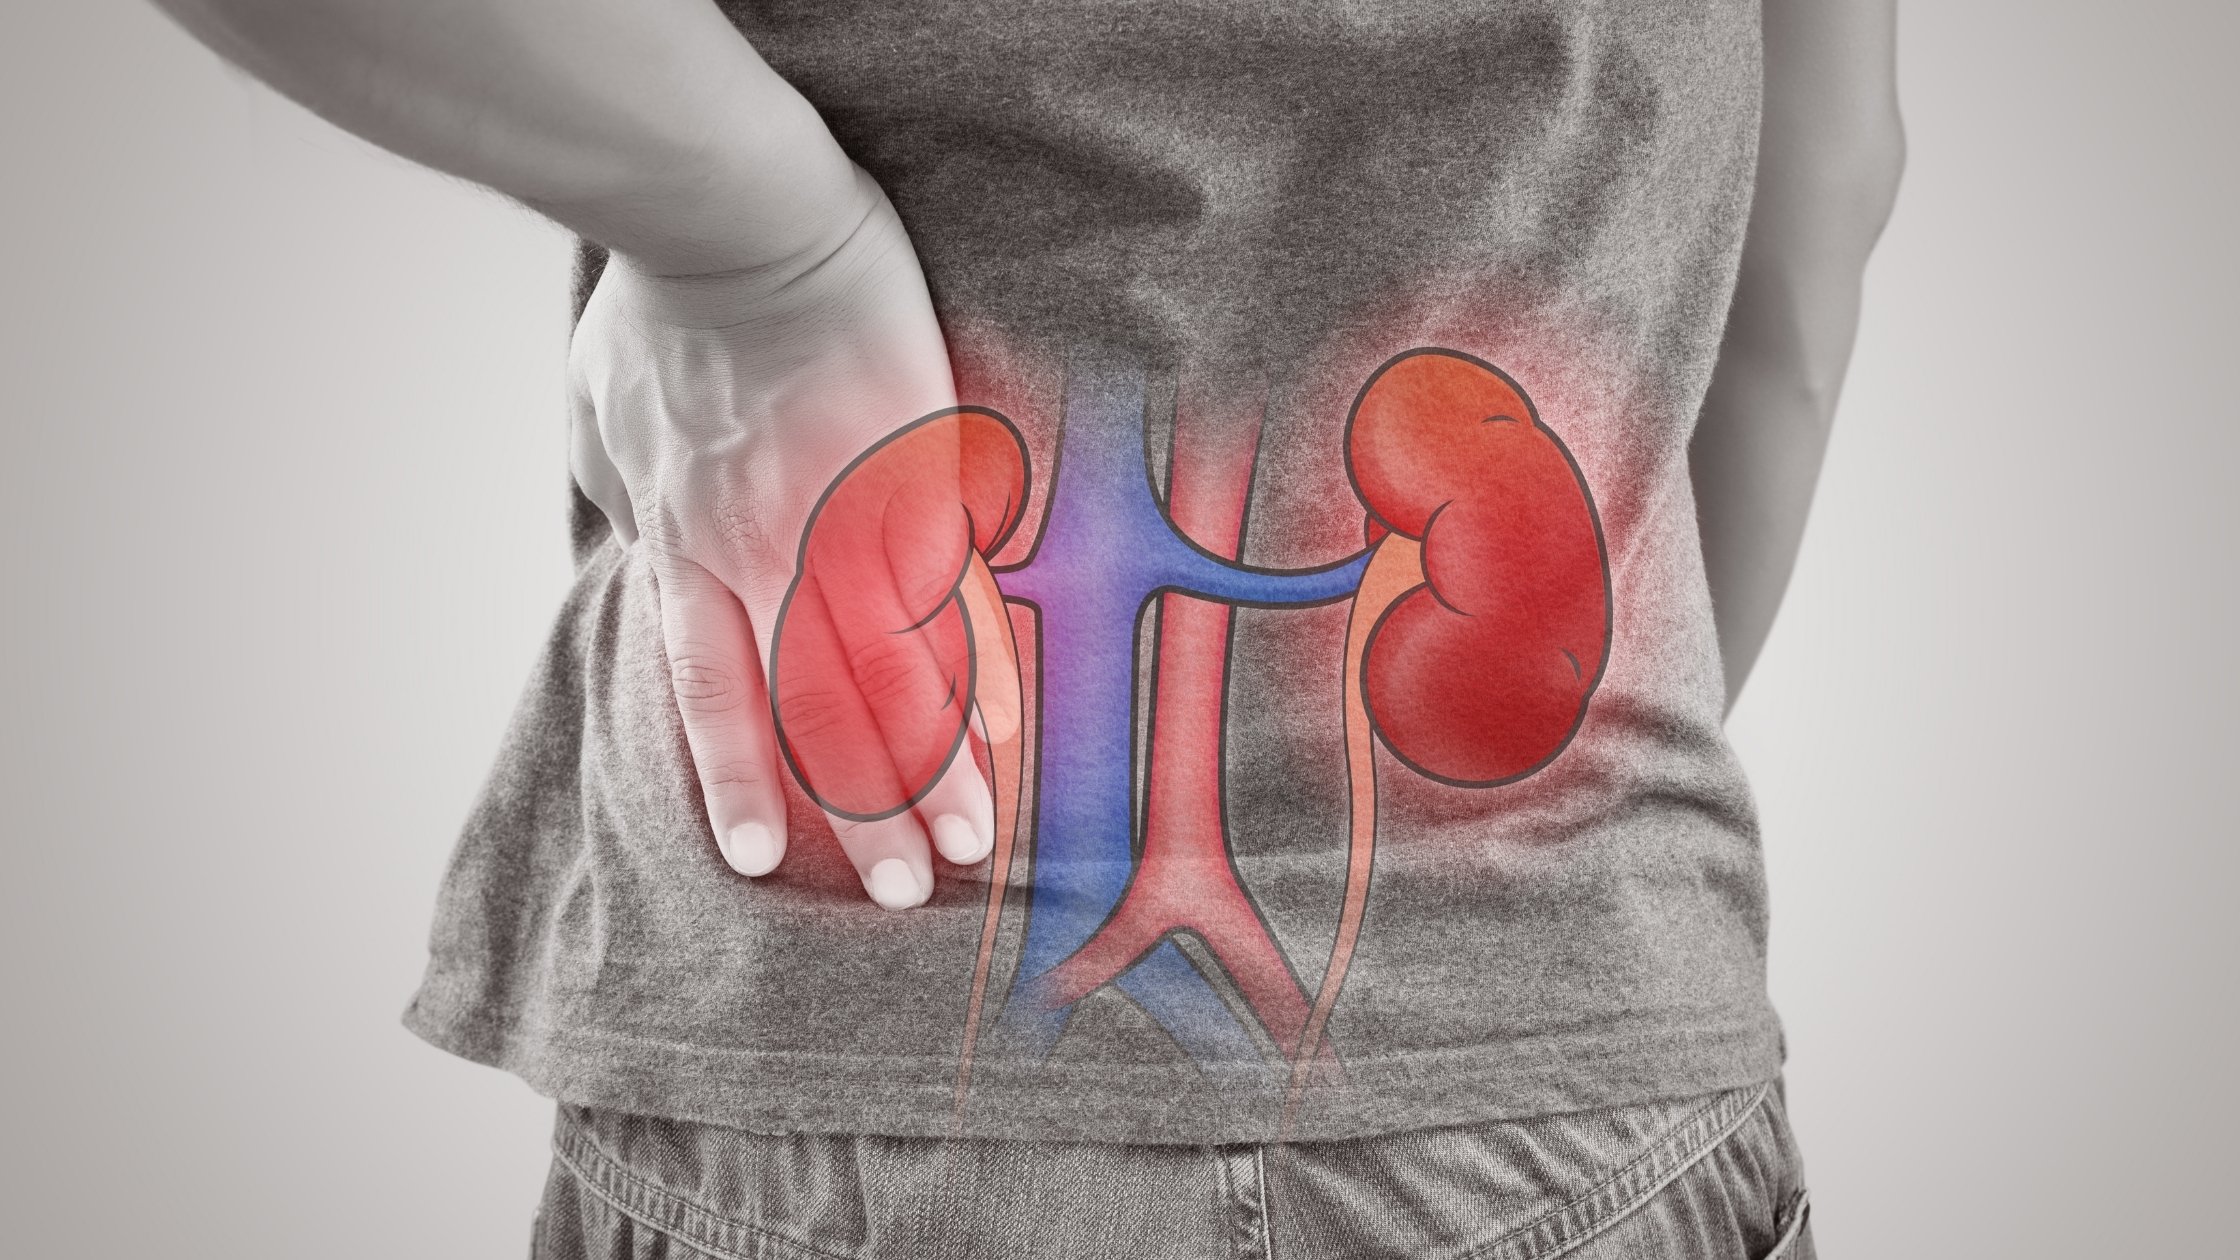 6 Habits That Destroy The Kidneys - Painkillers